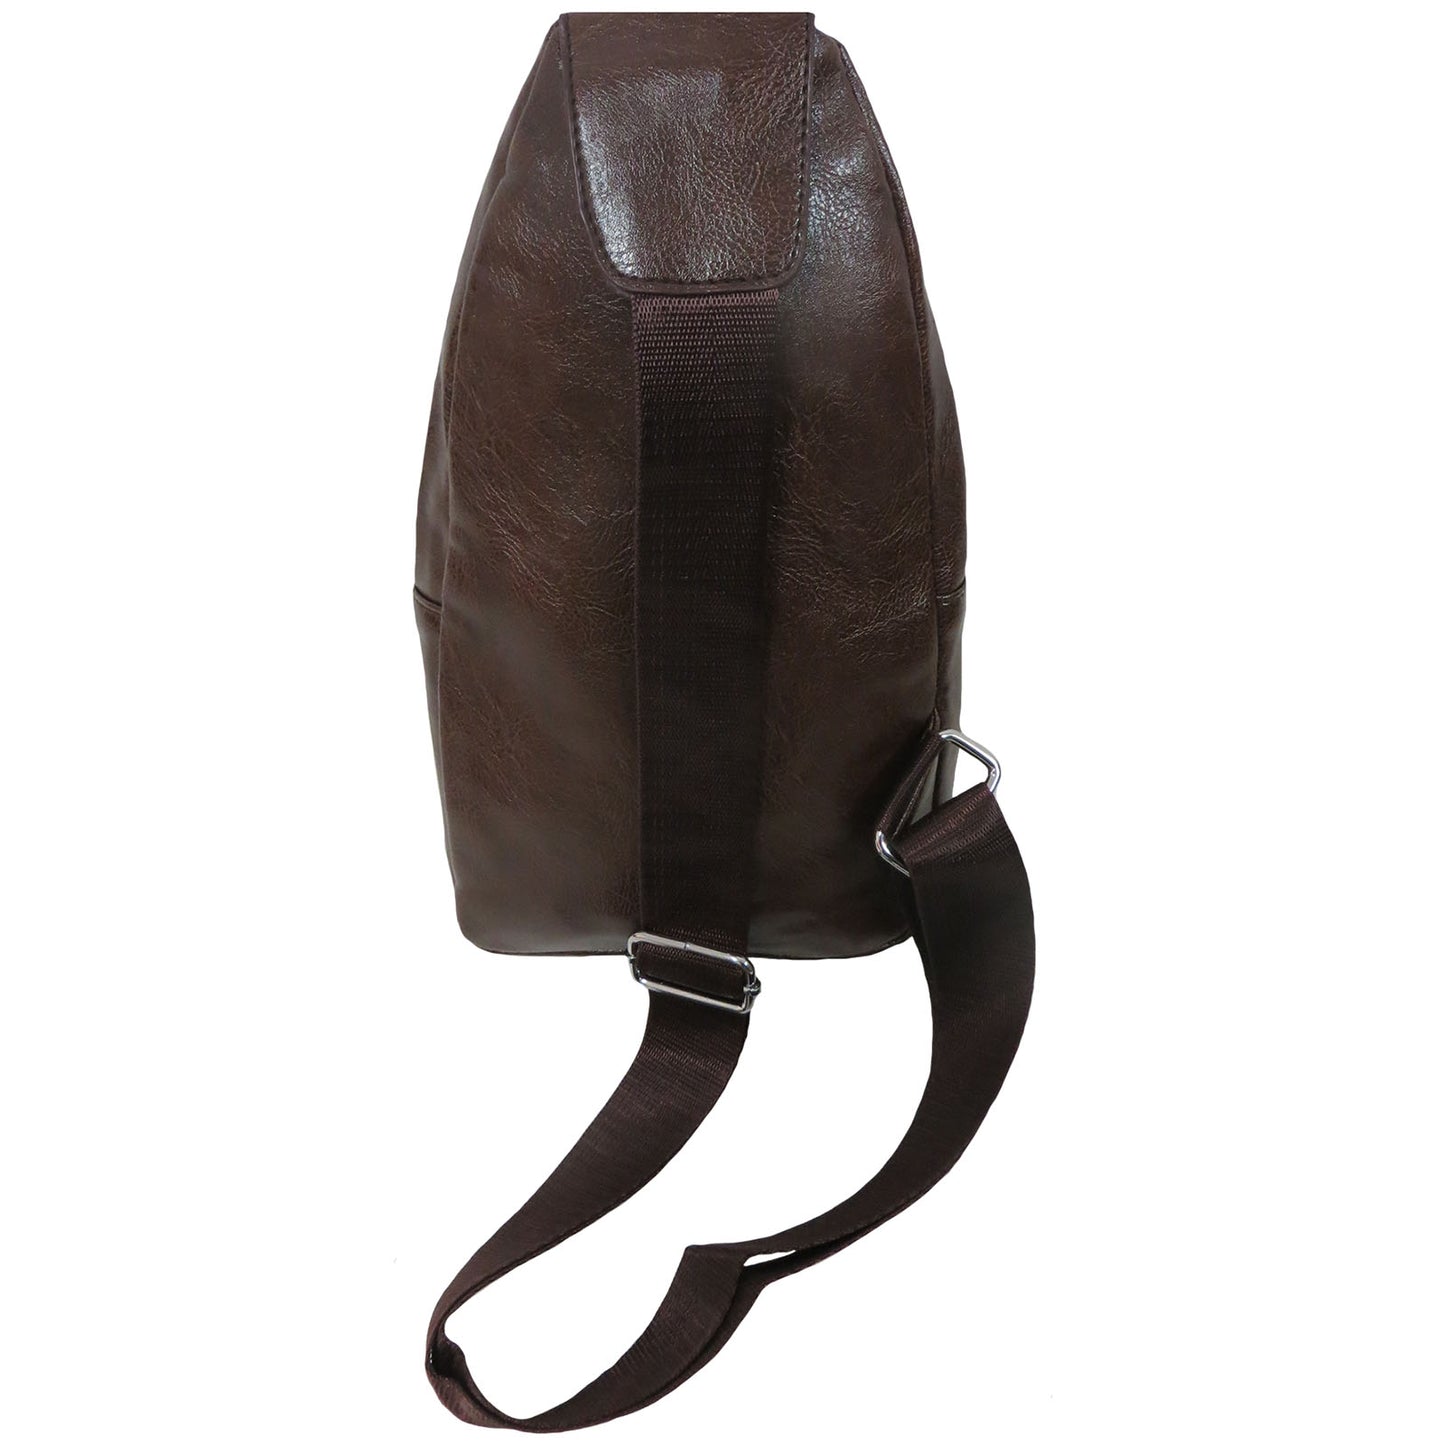 Wholesale Sling Bag in Brown Faux Leather - Alessa James